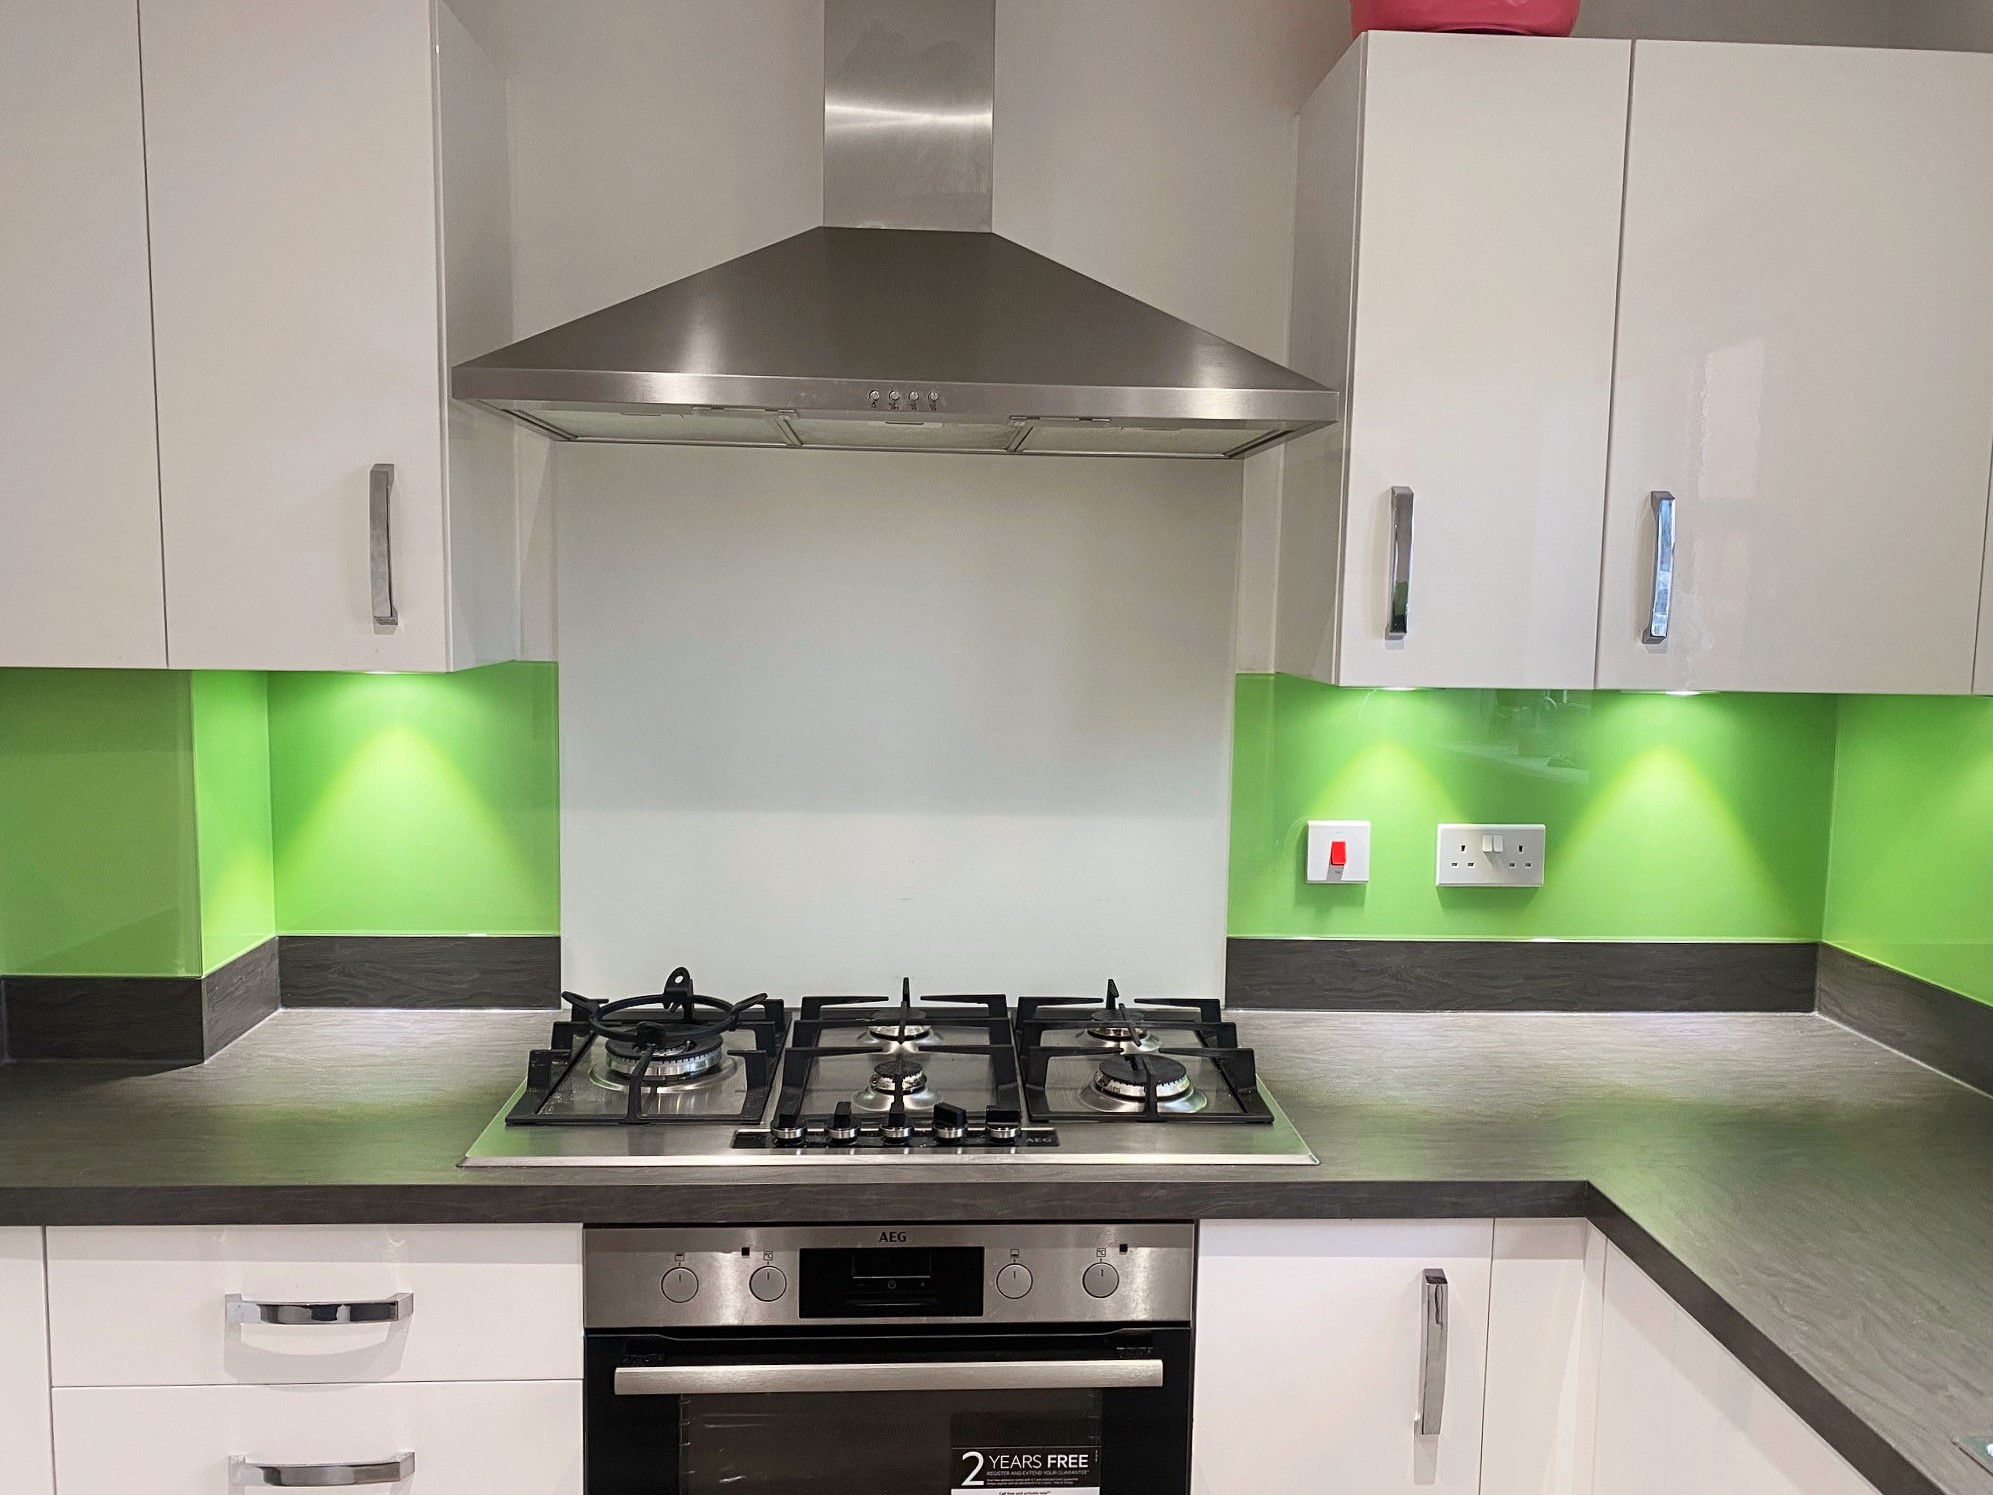 Painted colour splashback with green colour and over hang lights design fitted by glass inspirations ltd